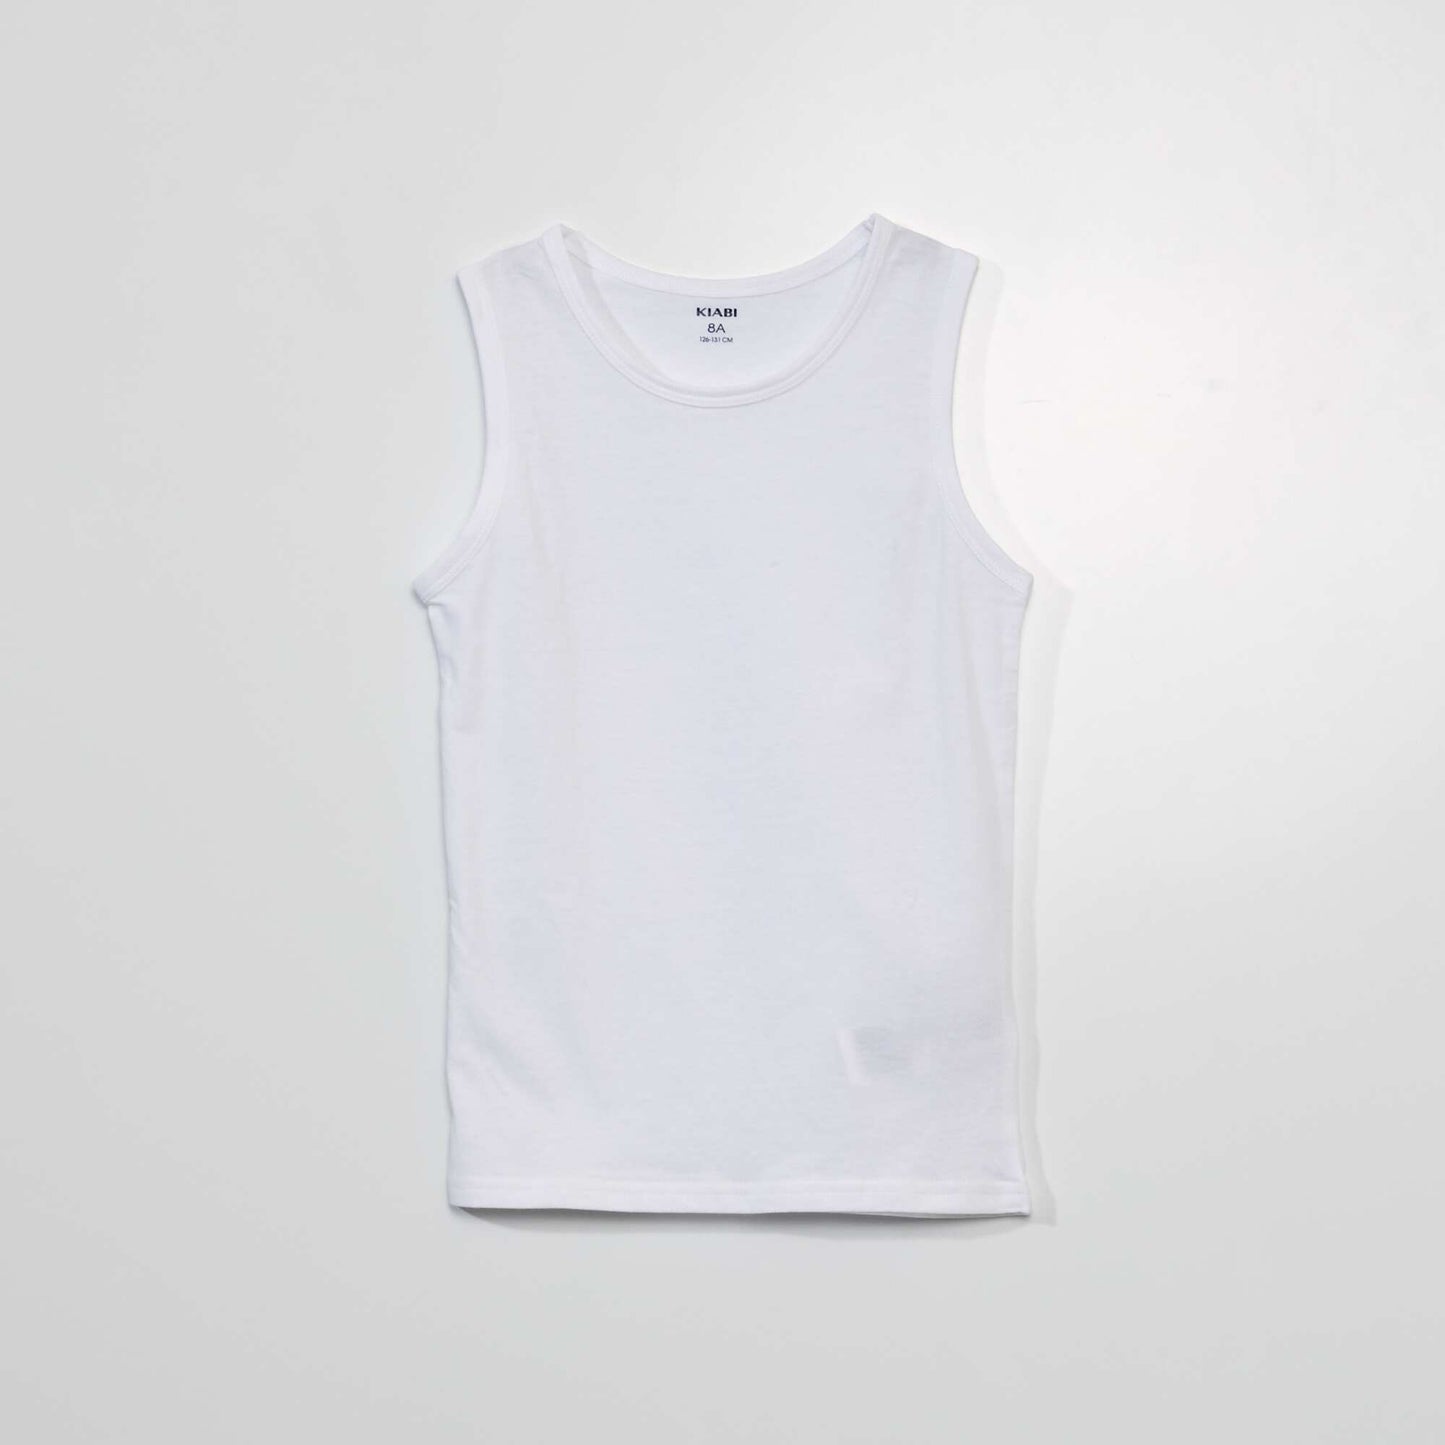 Pack of 3 cotton vest tops White